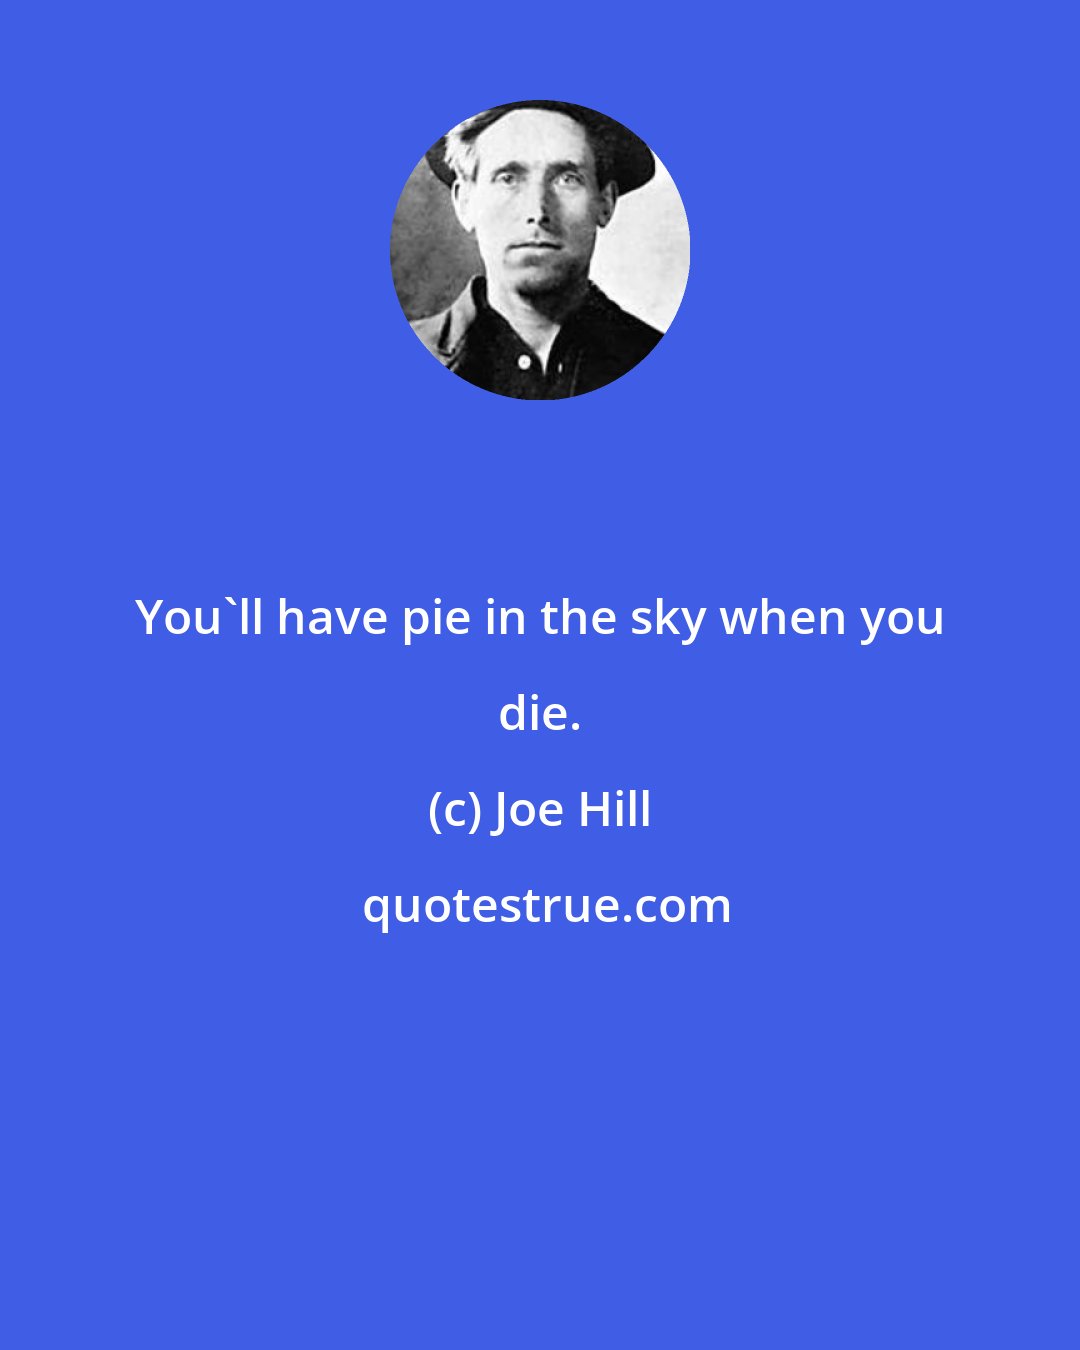 Joe Hill: You'll have pie in the sky when you die.